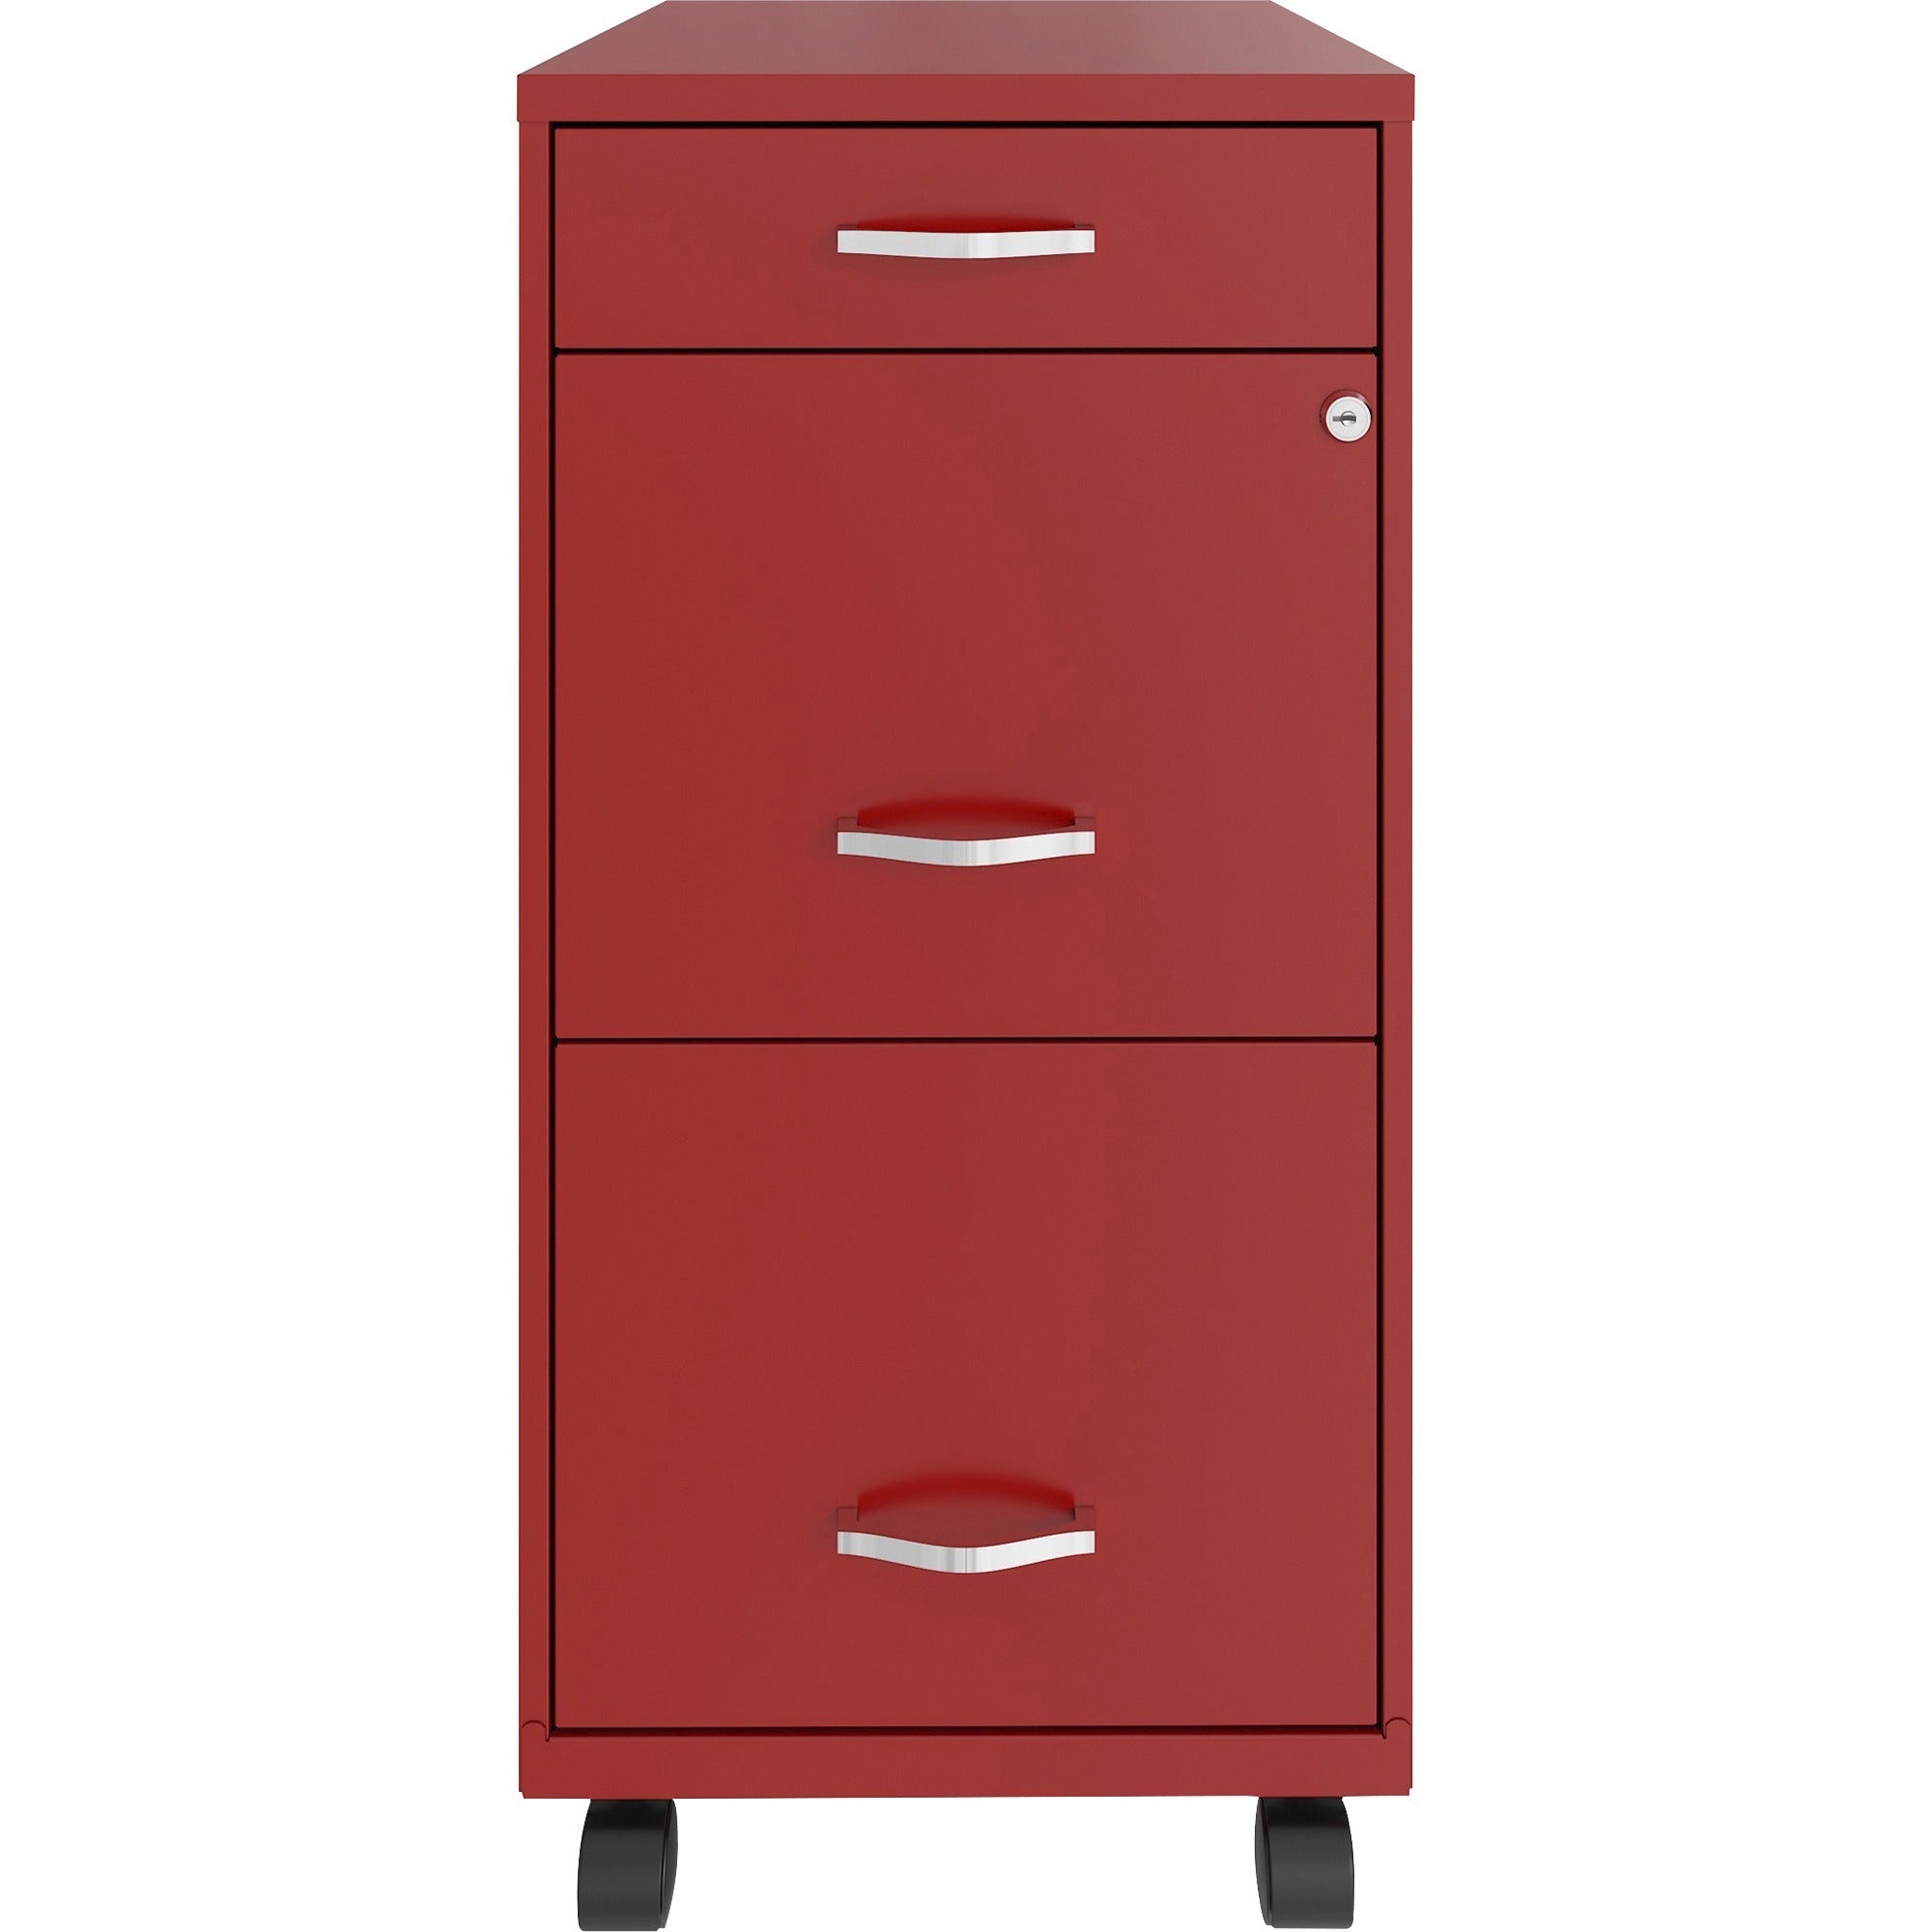 nusparc-mobile-file-cabinet-142-x-18-x-295-3-x-drawers-for-file-box-letter-mobility-locking-drawer-glide-suspension-3-4-drawer-extension-cam-lock-nonporous-surface-red-painted-steel-recycled_nprvf318bmrd - 2